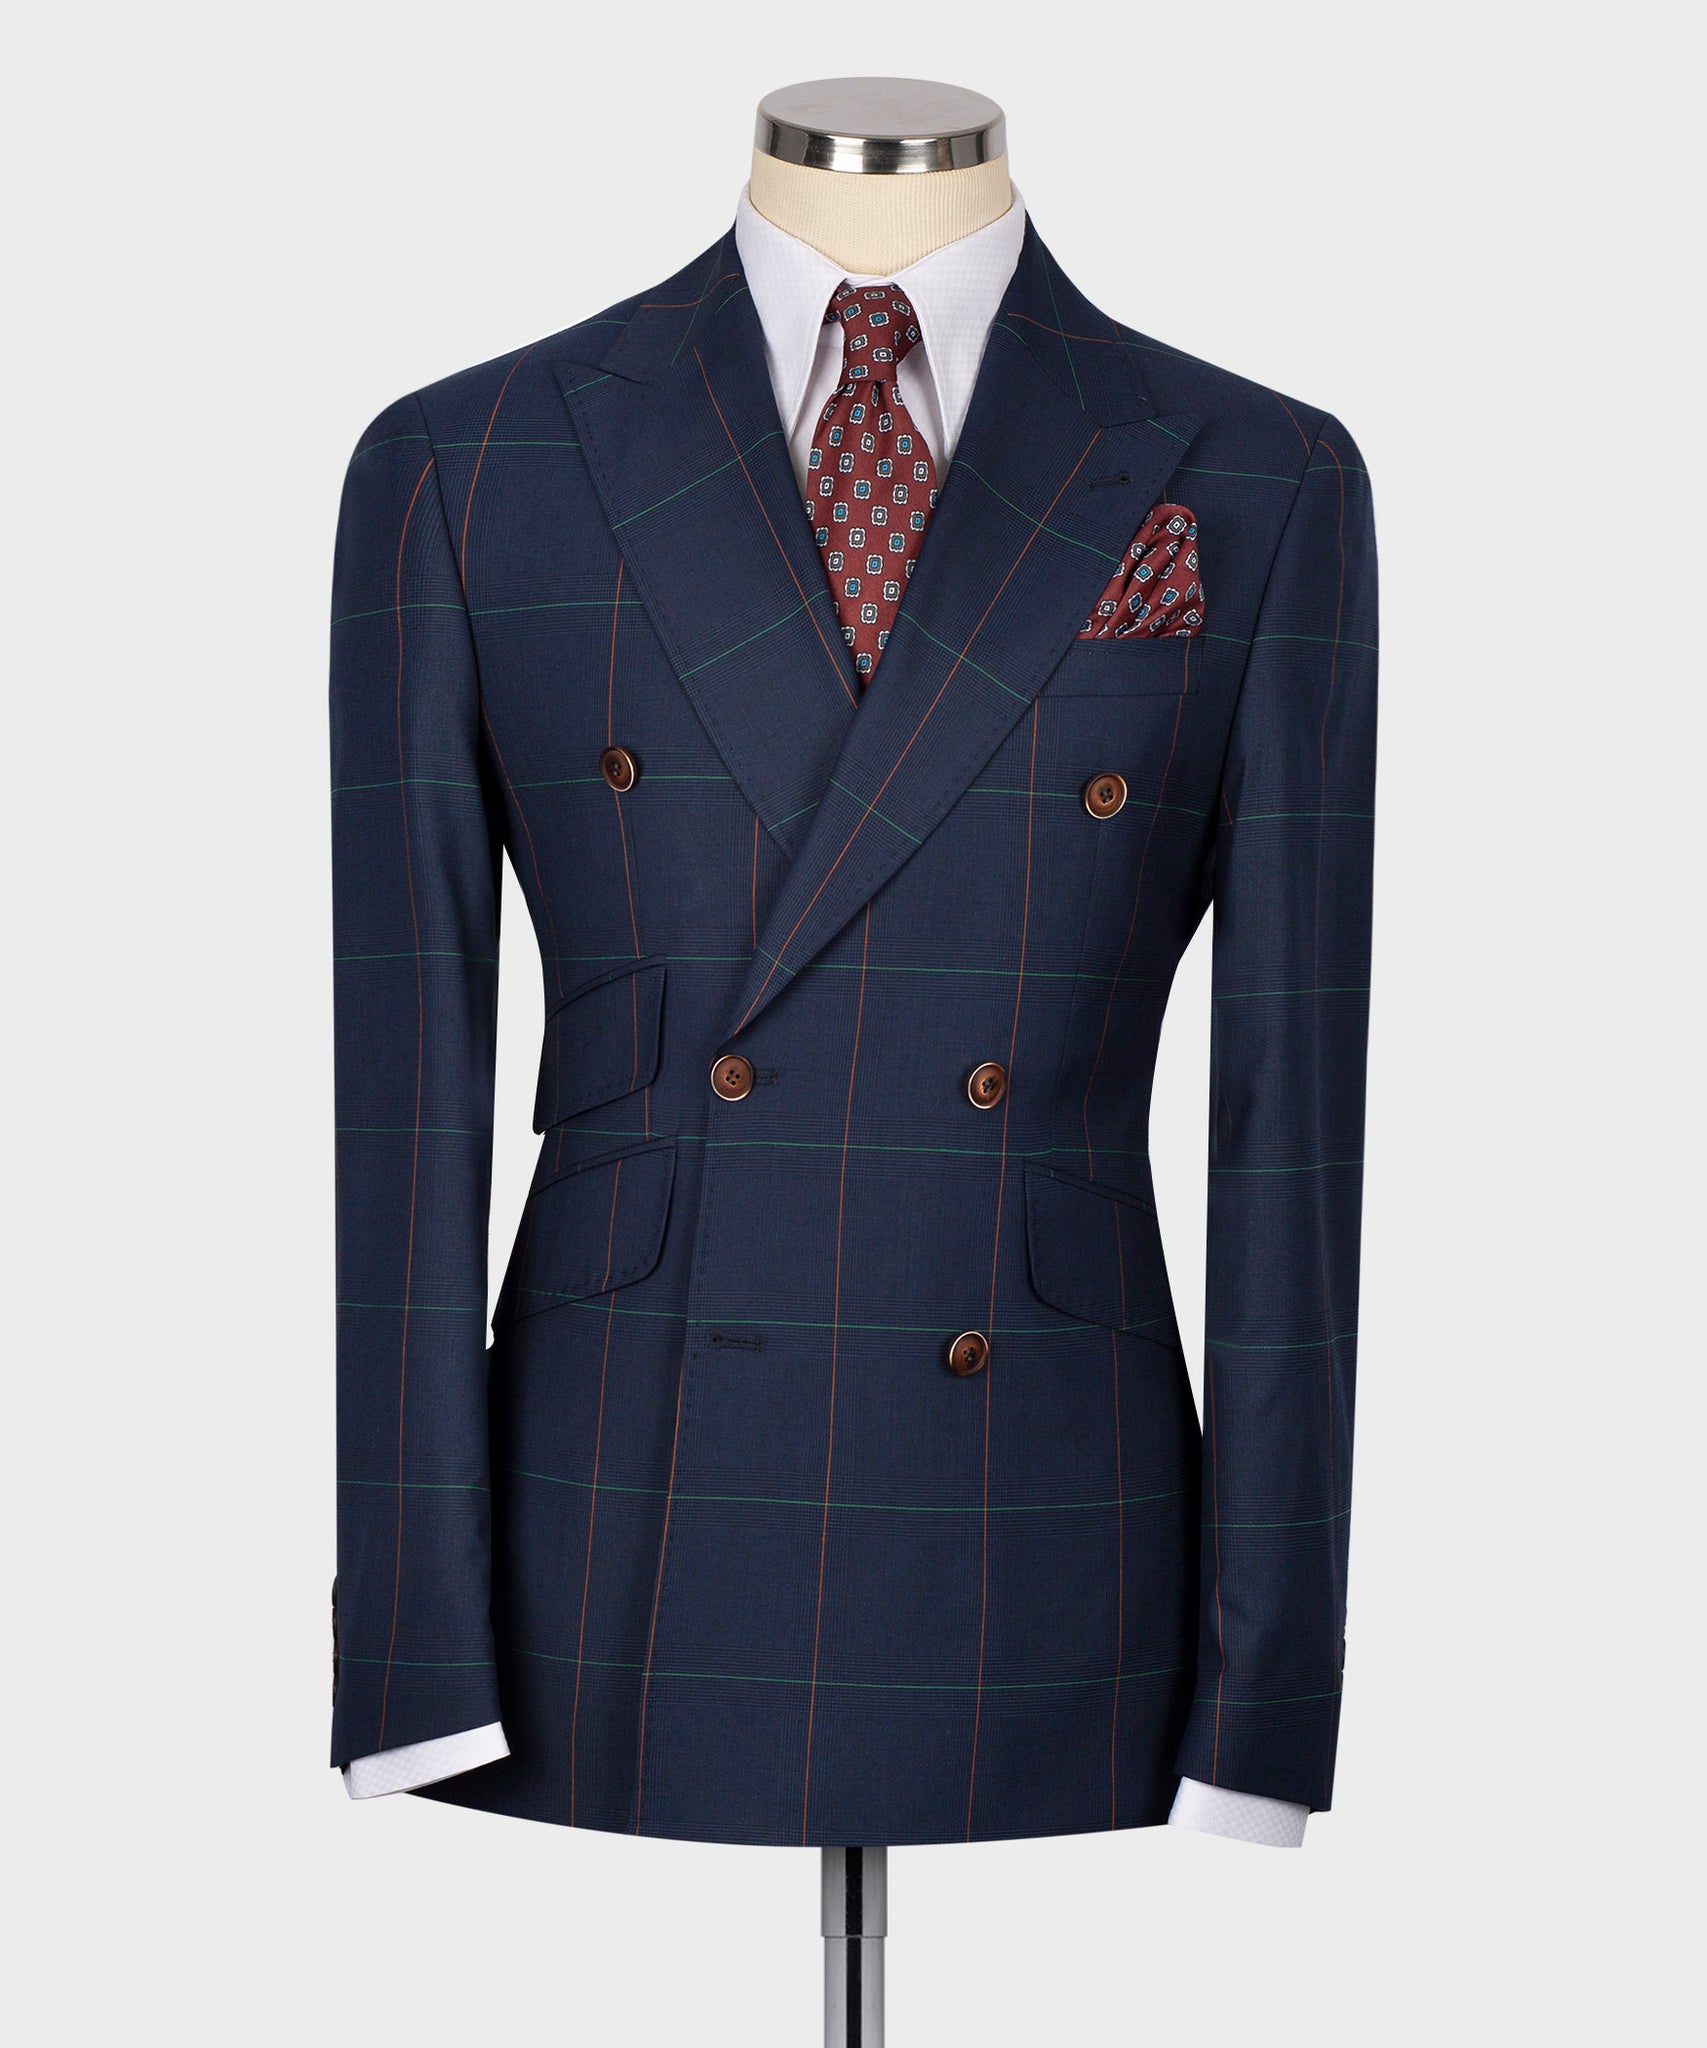 DOUBLE BREASTED DARK BLUE MEN'S SUIT